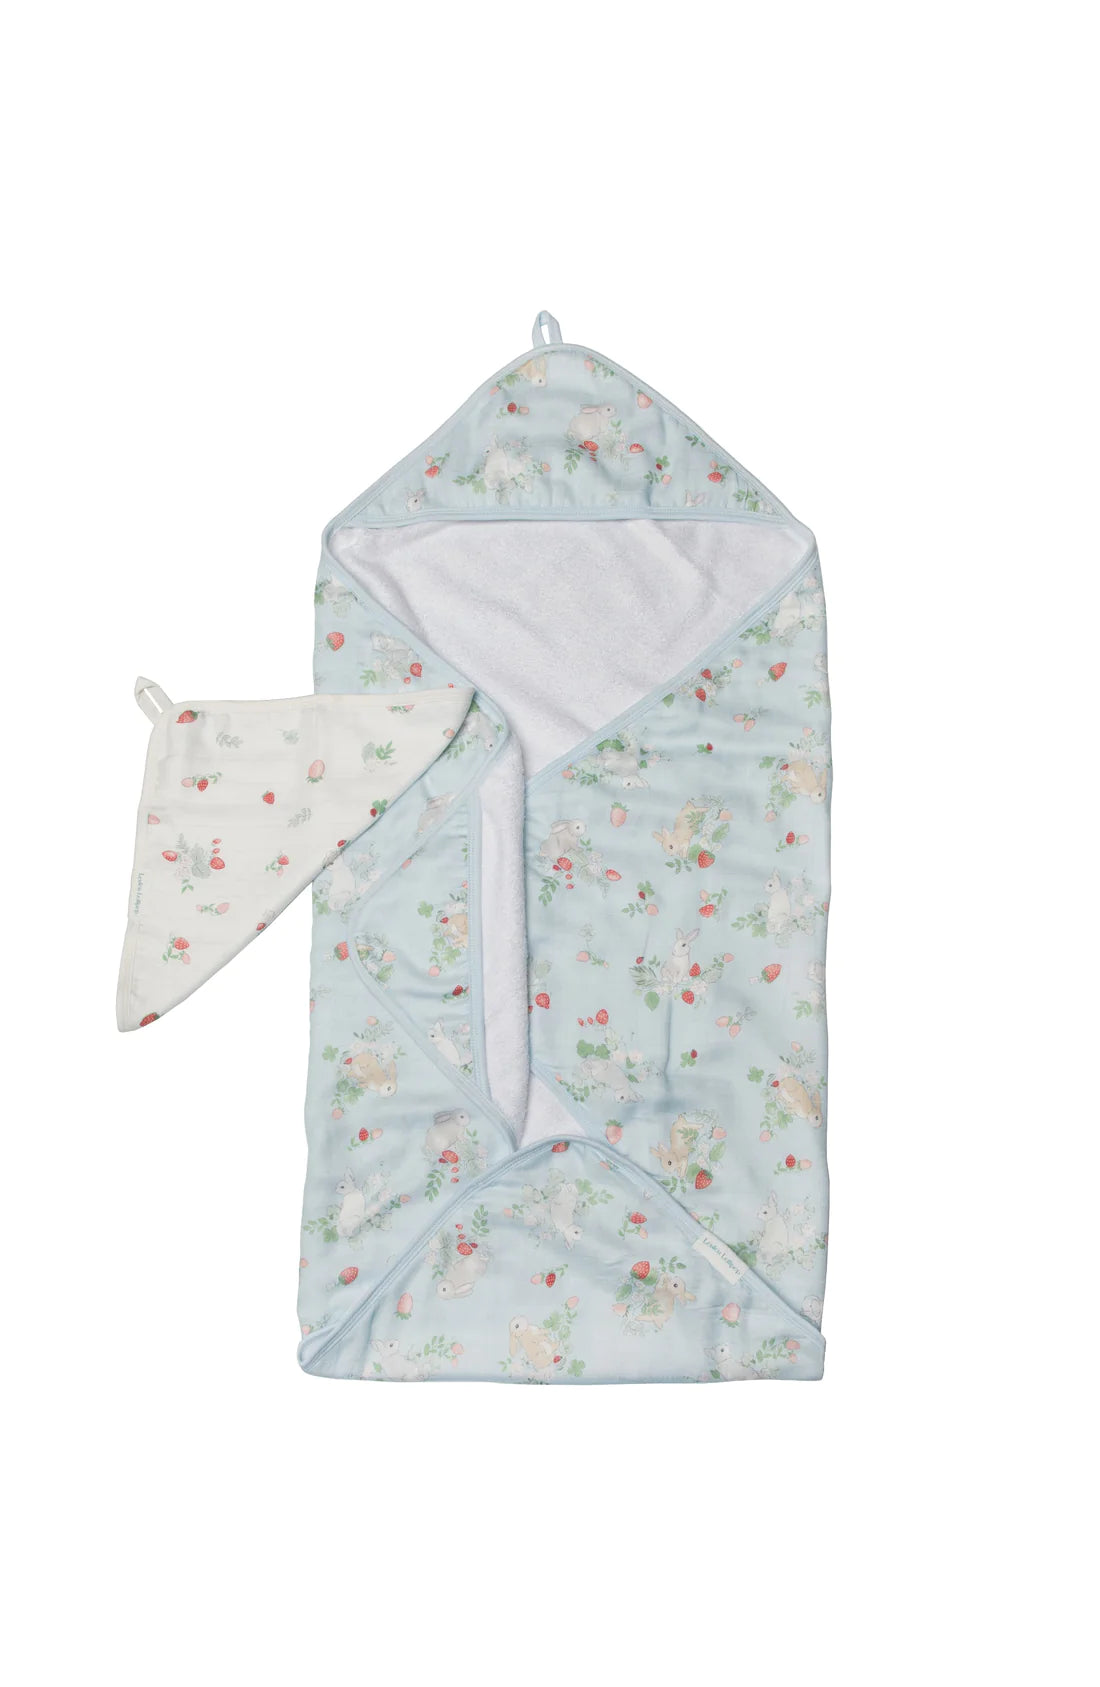 LouLou Lollipop Some Bunny Loves You Hooded Towel Set